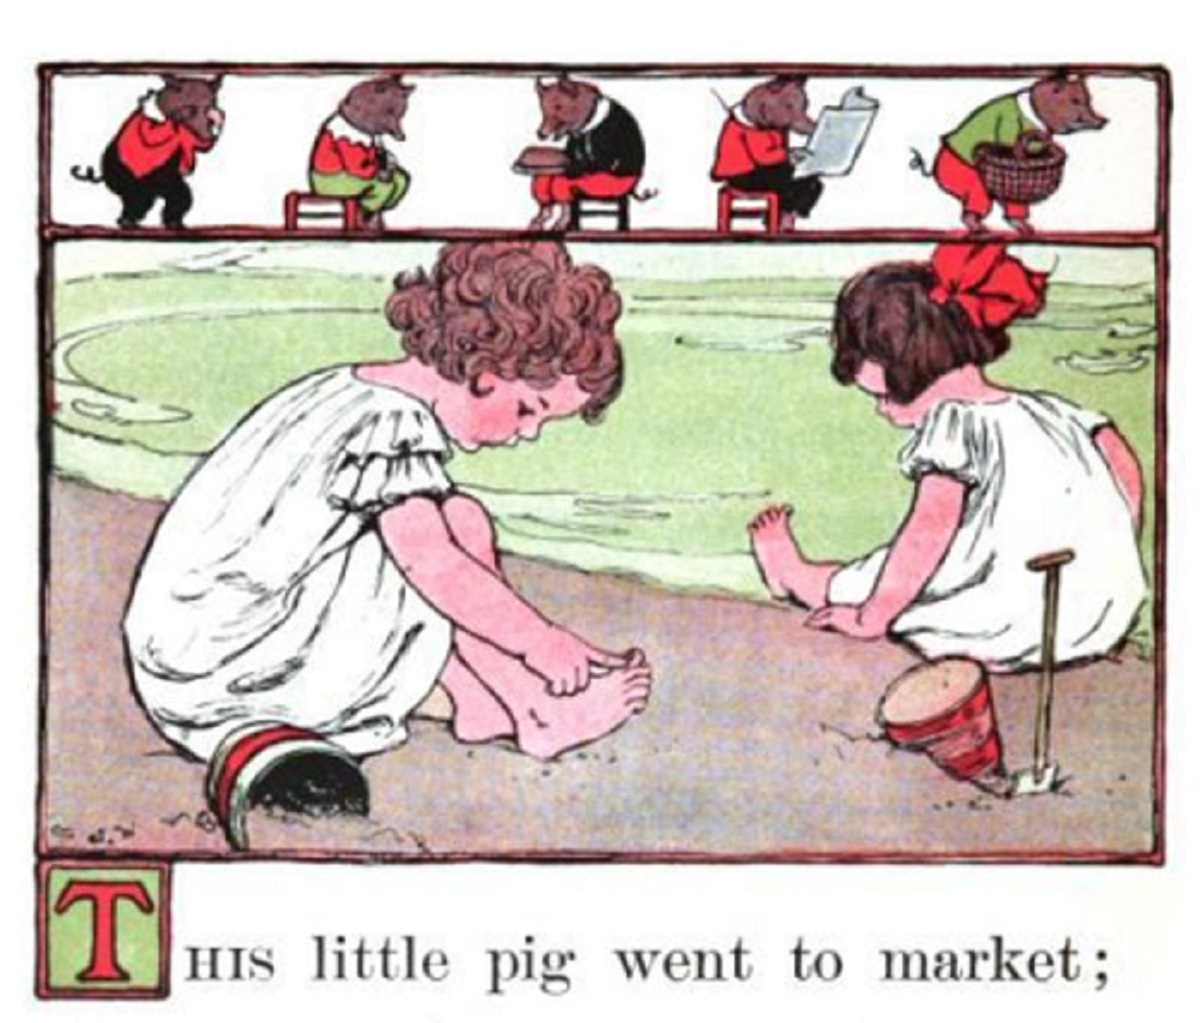 I was at least 50 when I learned that the little piggy who went to market wasn’t shopping.